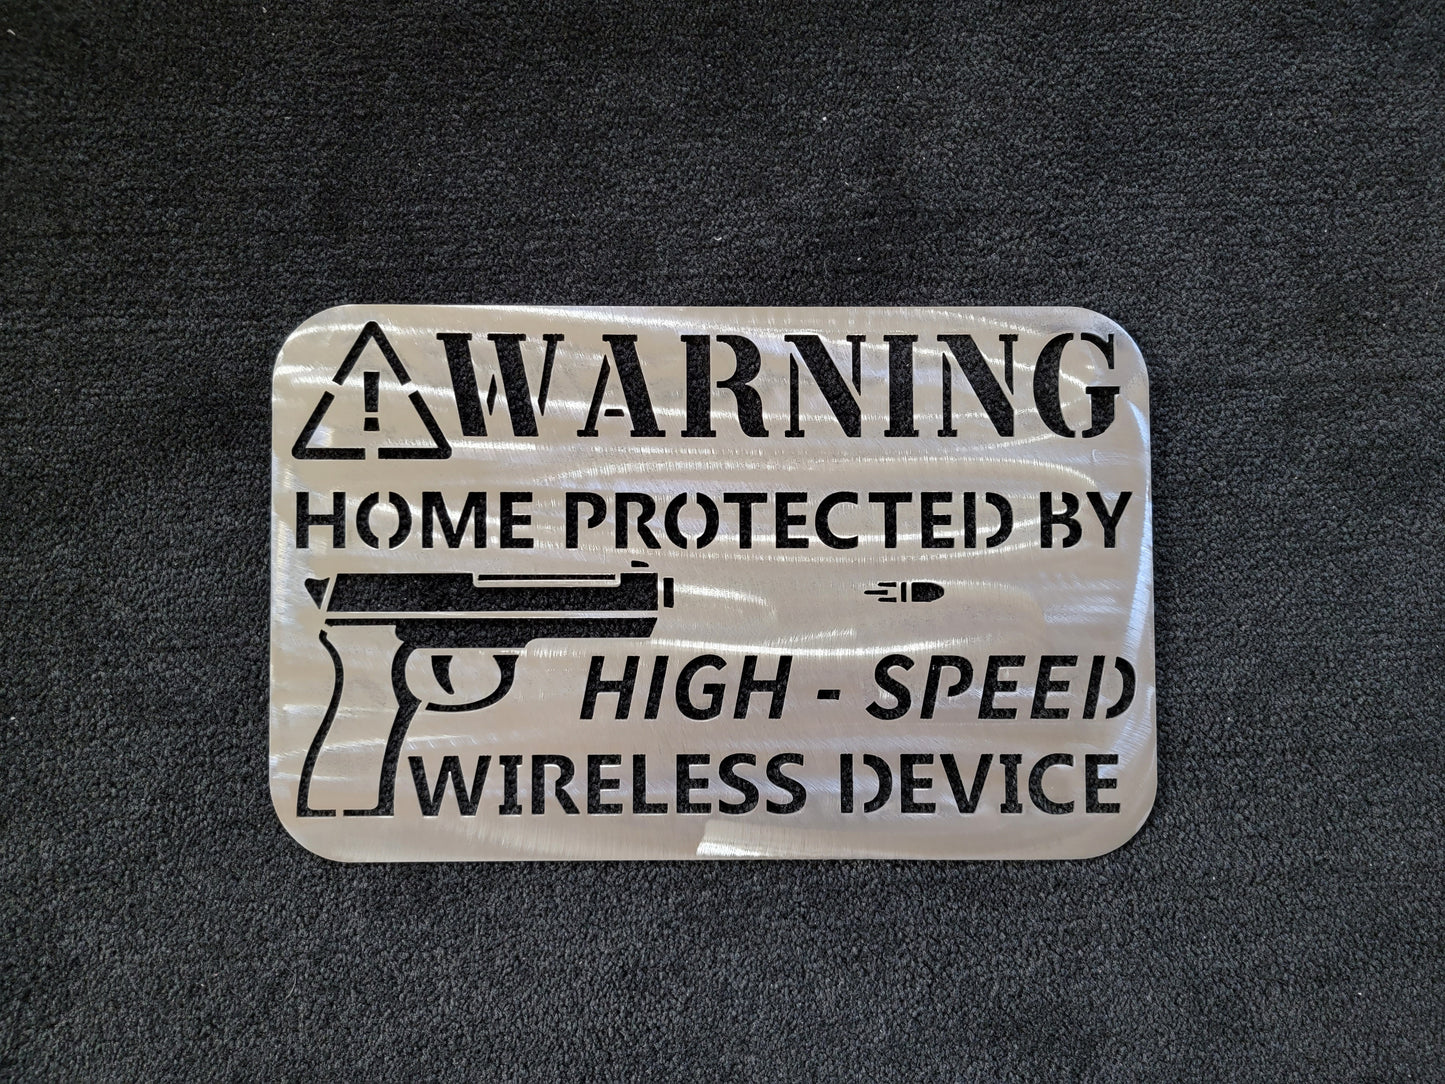 Home Protected by High Speed Wireless Device - Metal Warning Sign